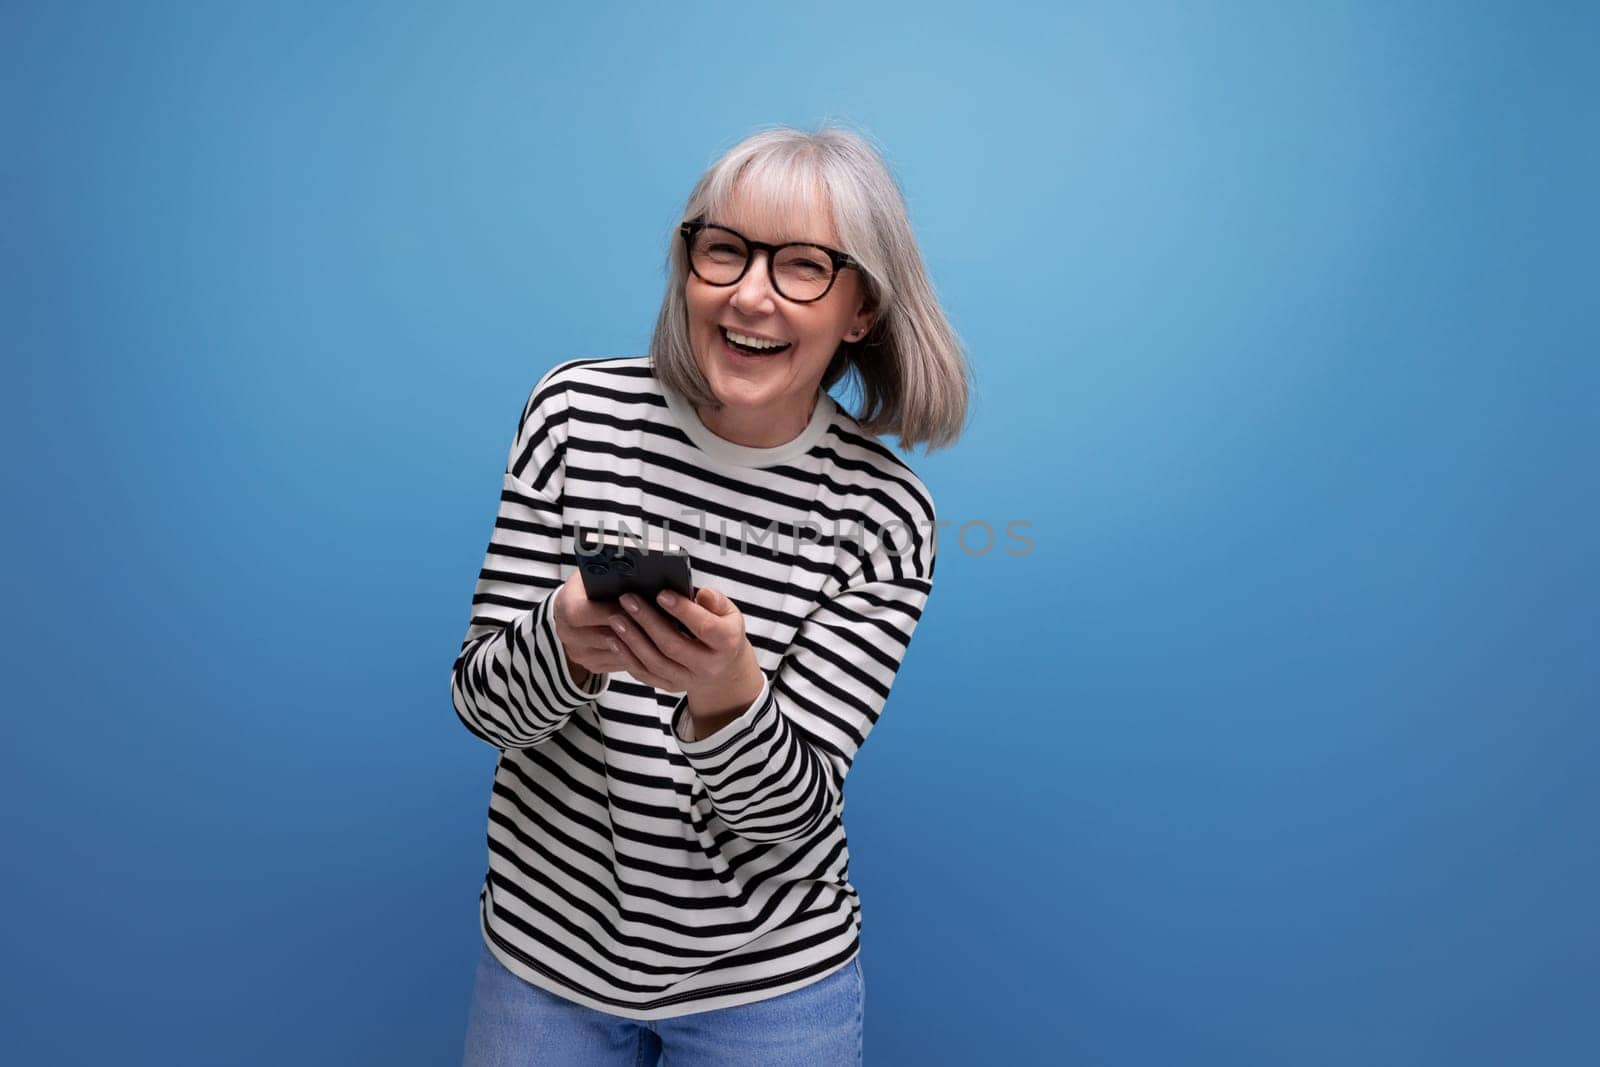 well-groomed slender 60s middle-aged woman holding a smartphone with a mockup on a bright background with copy space.